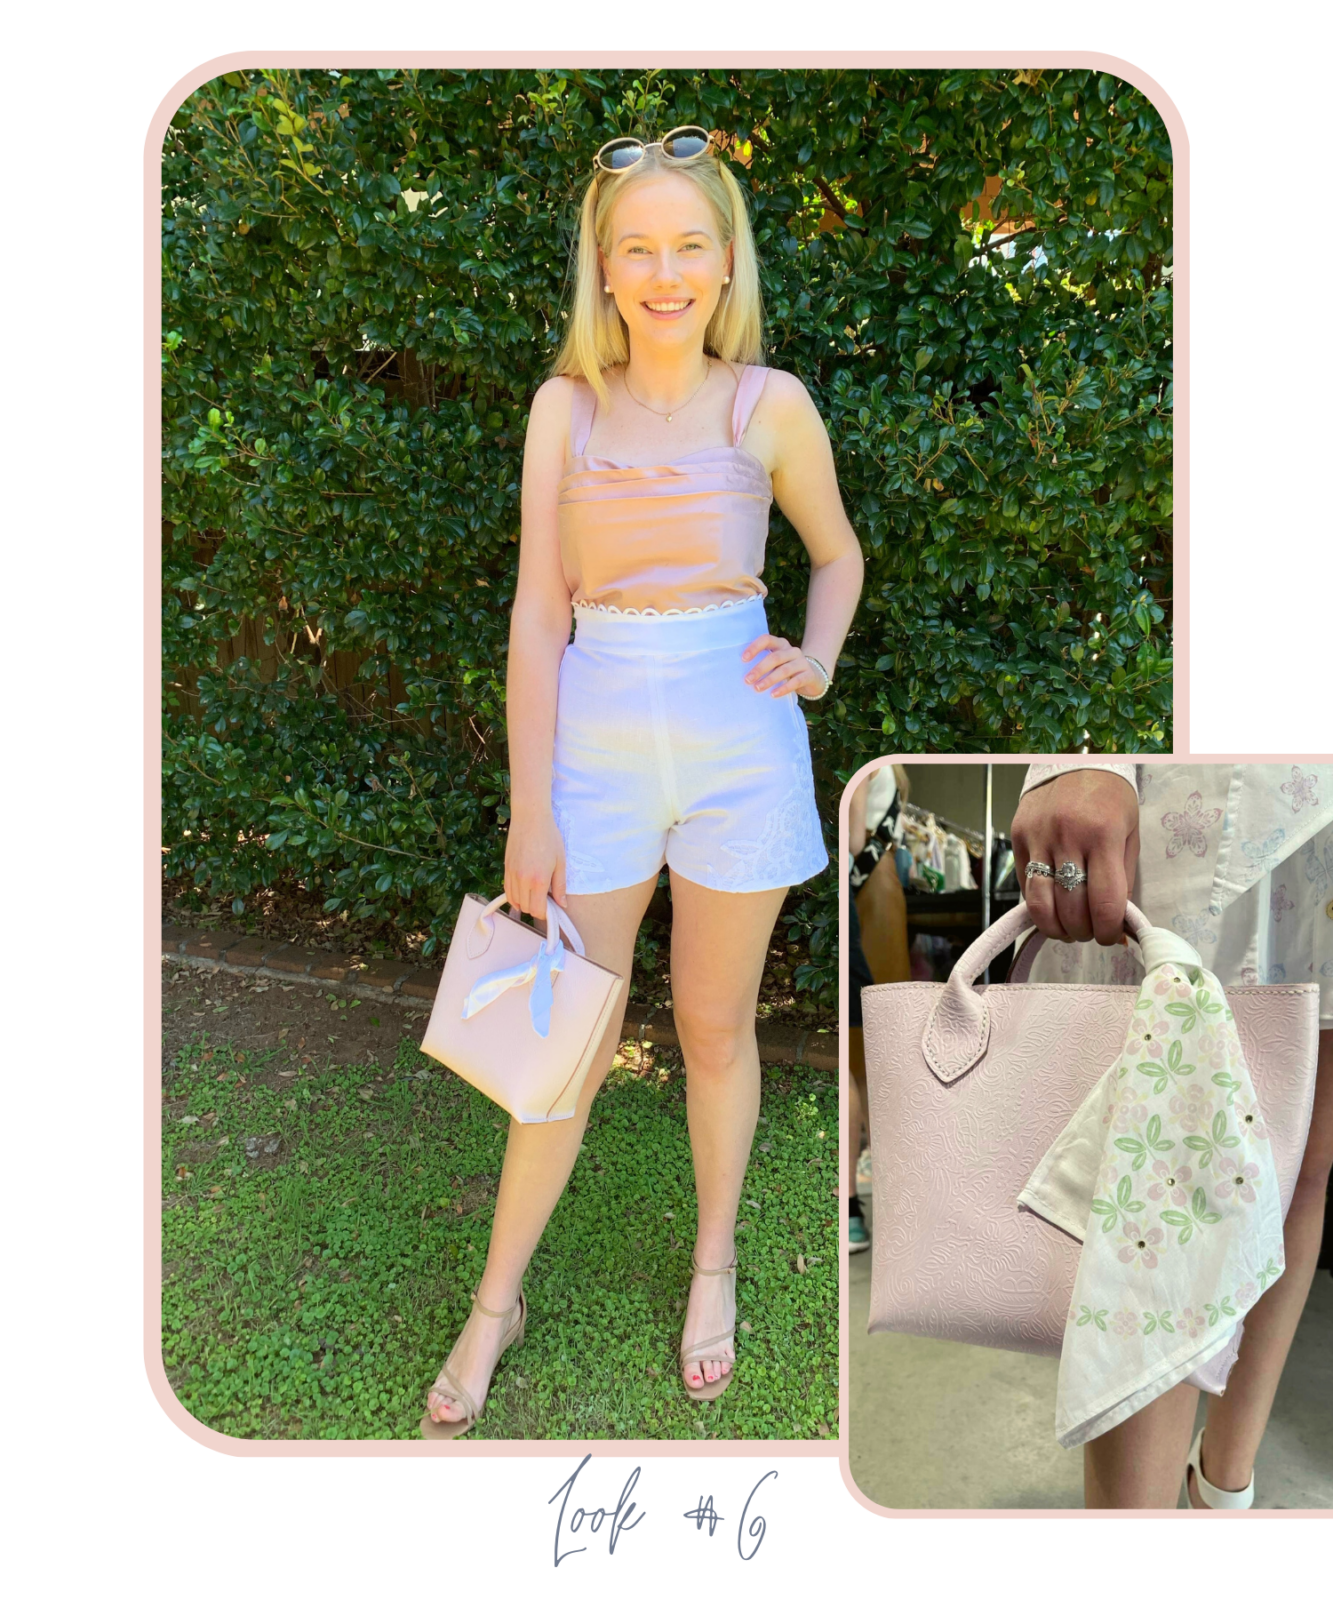 Model poses in leafy green garden wearing a shantung silk fitted pastel pink bodice with high-waisted white a-line lace shorts. The appliquéd lace is from off cuts of the heirloom tablecloth featured in look 3. 
Model holds hand-made Italian pastel pink embossed leather handbag.  